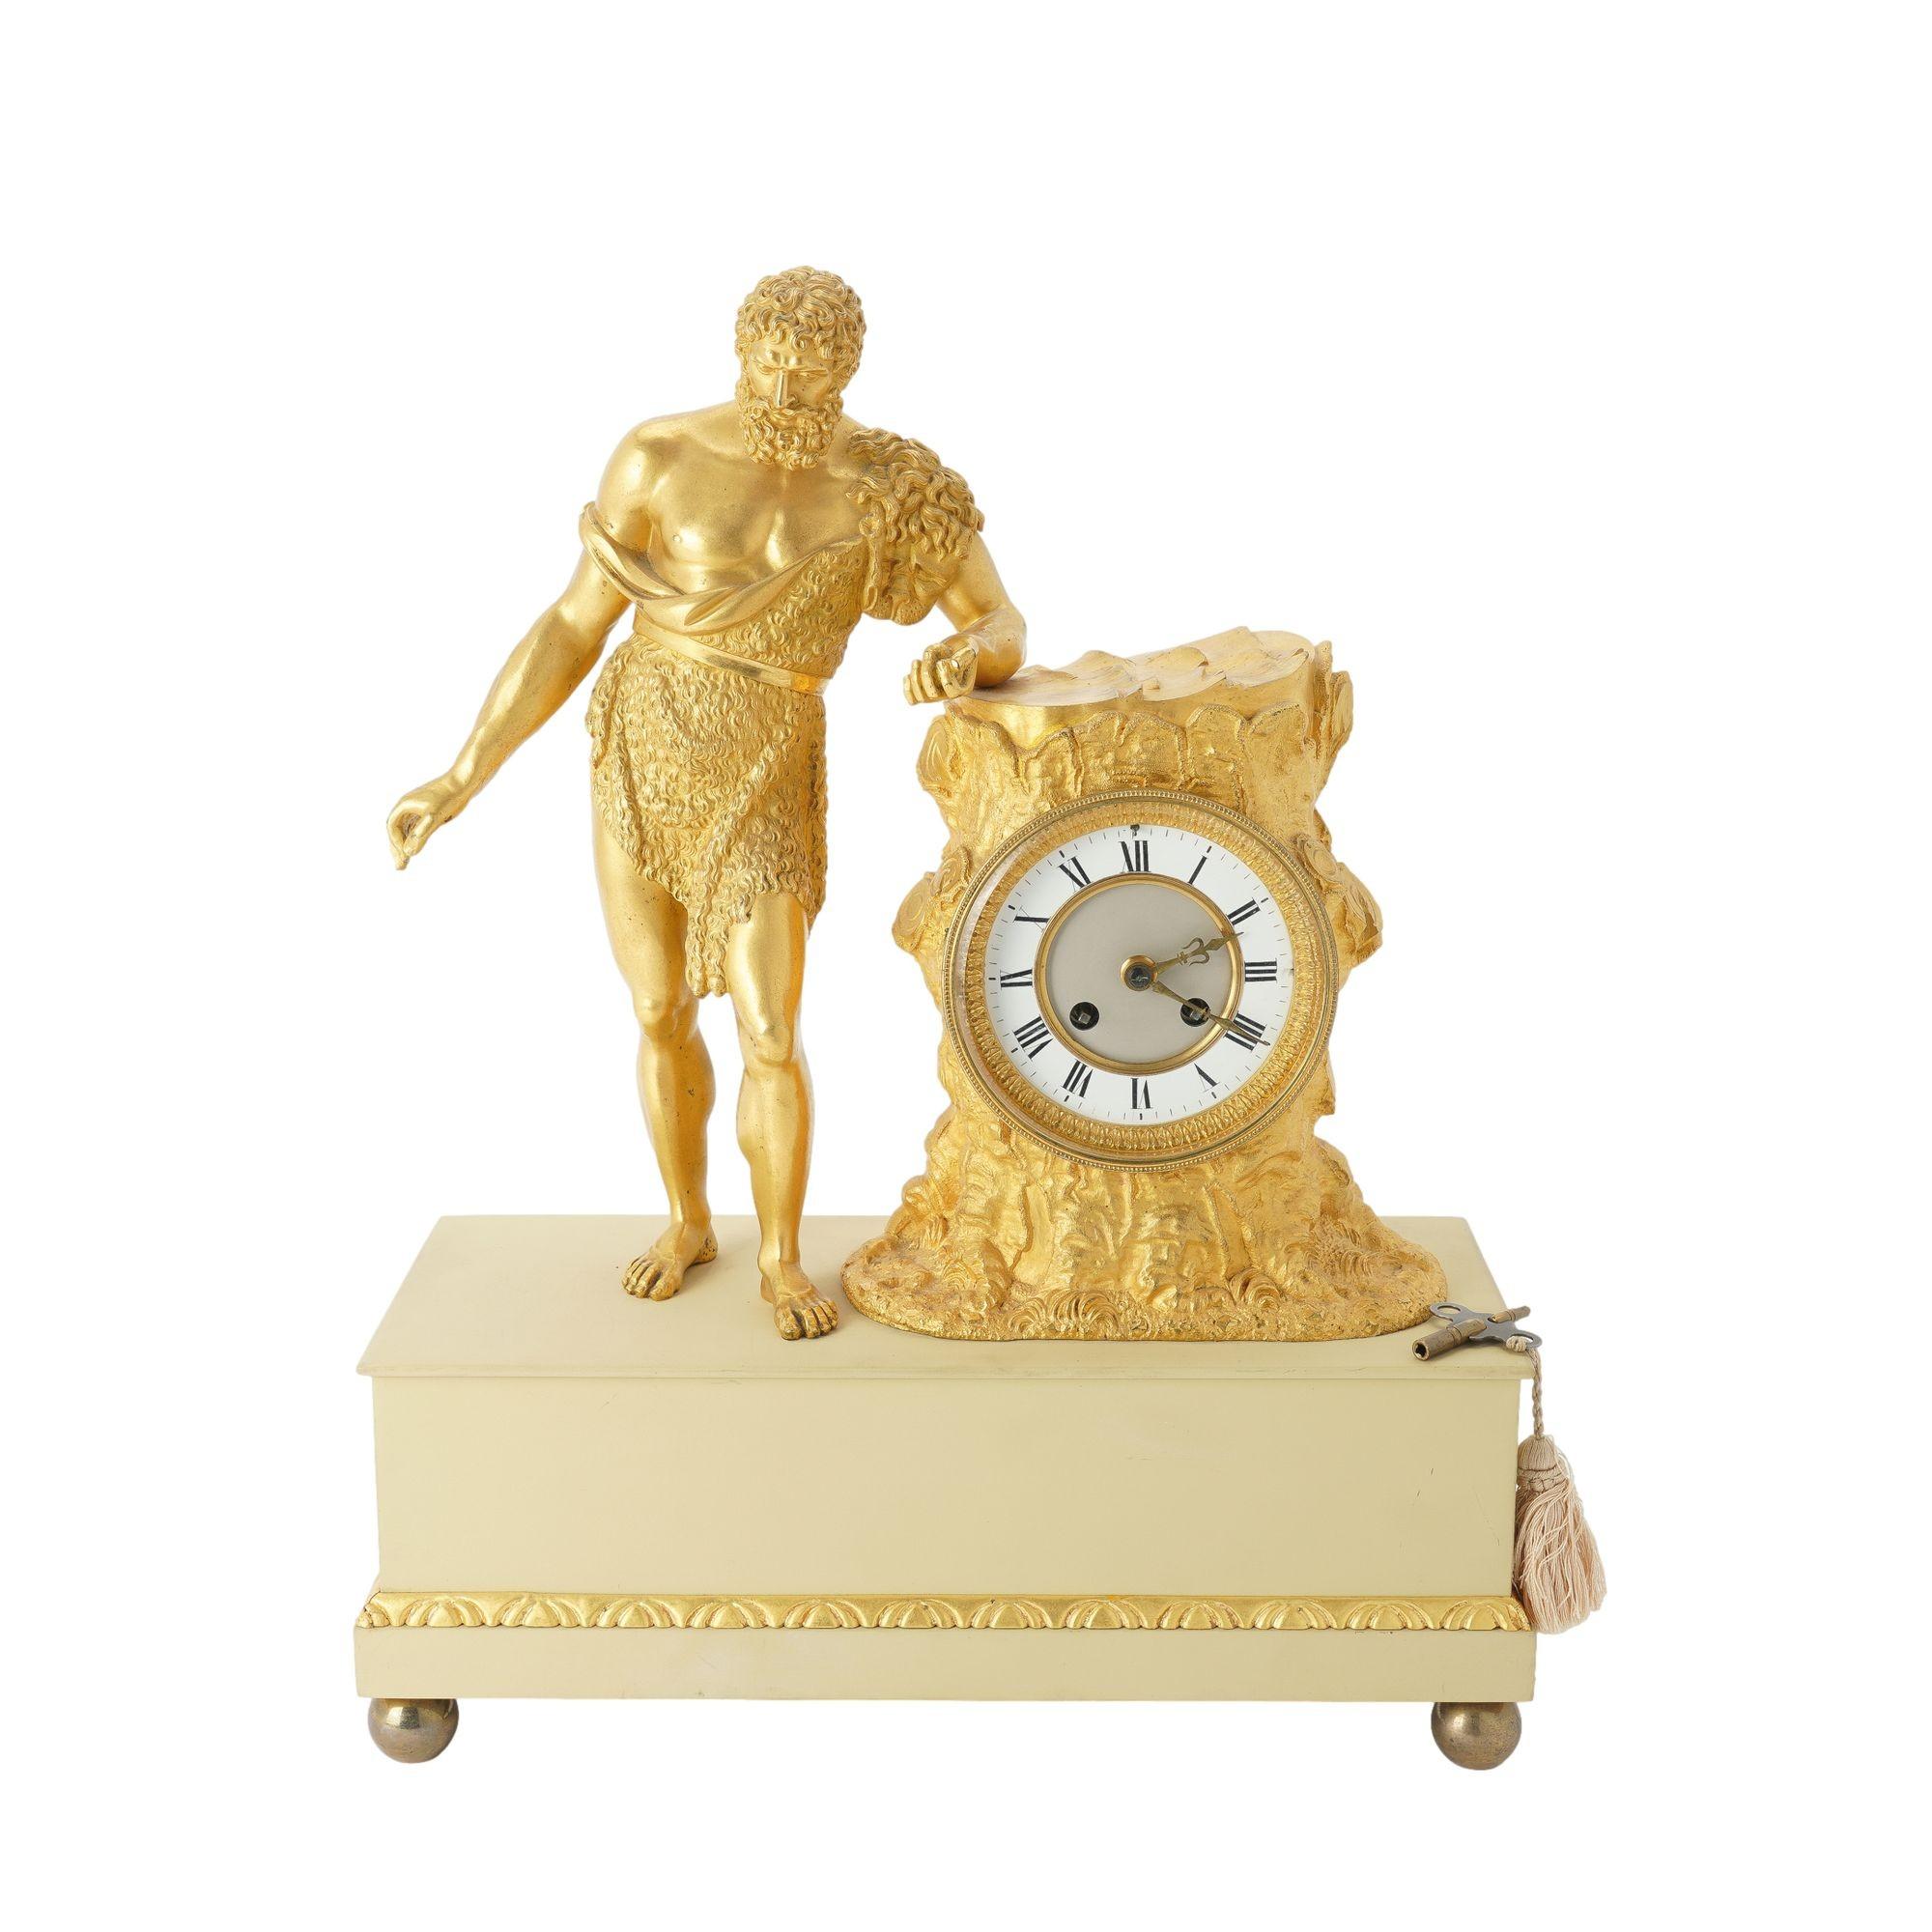 French Charles X period fire gilt bronze mantel clock, c. 1820-30 For Sale 8